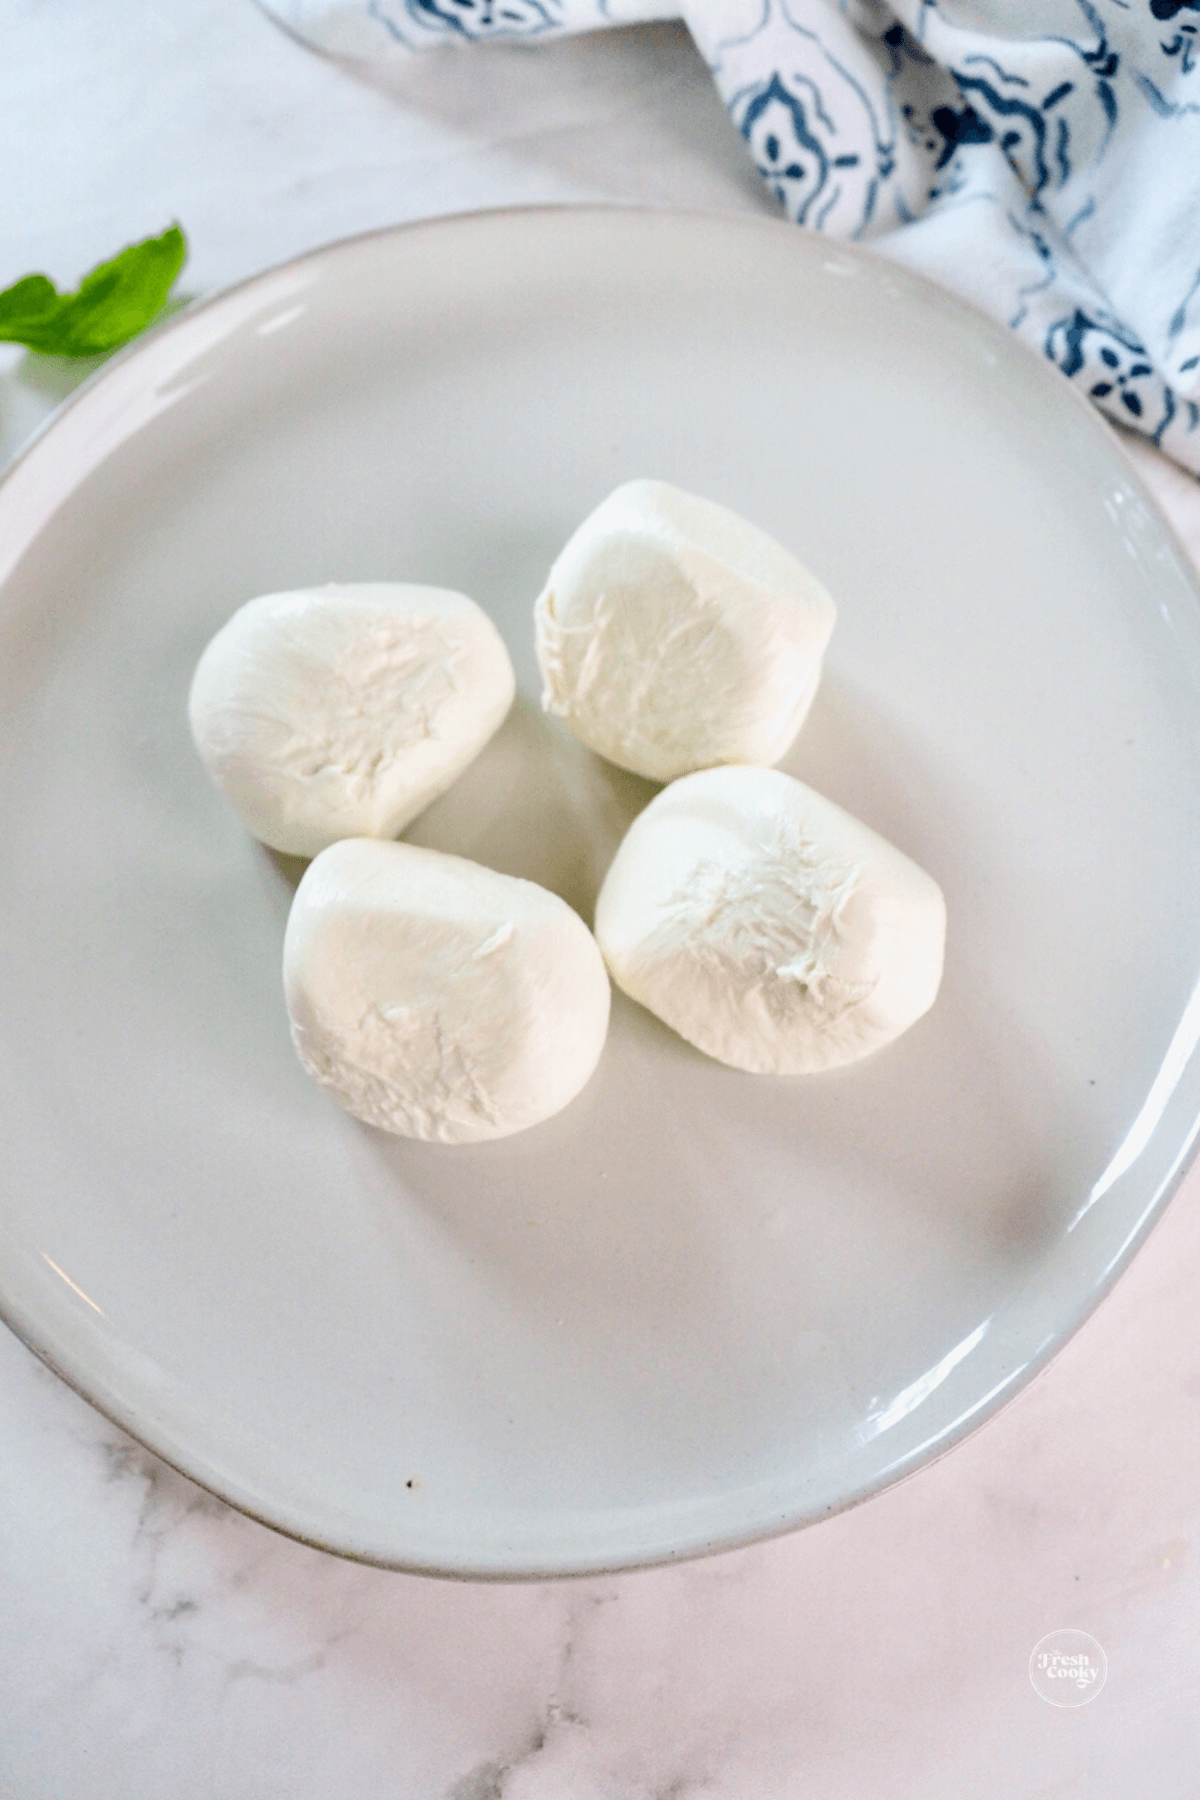 4 balls of burrata cheese on rimmed plate. 